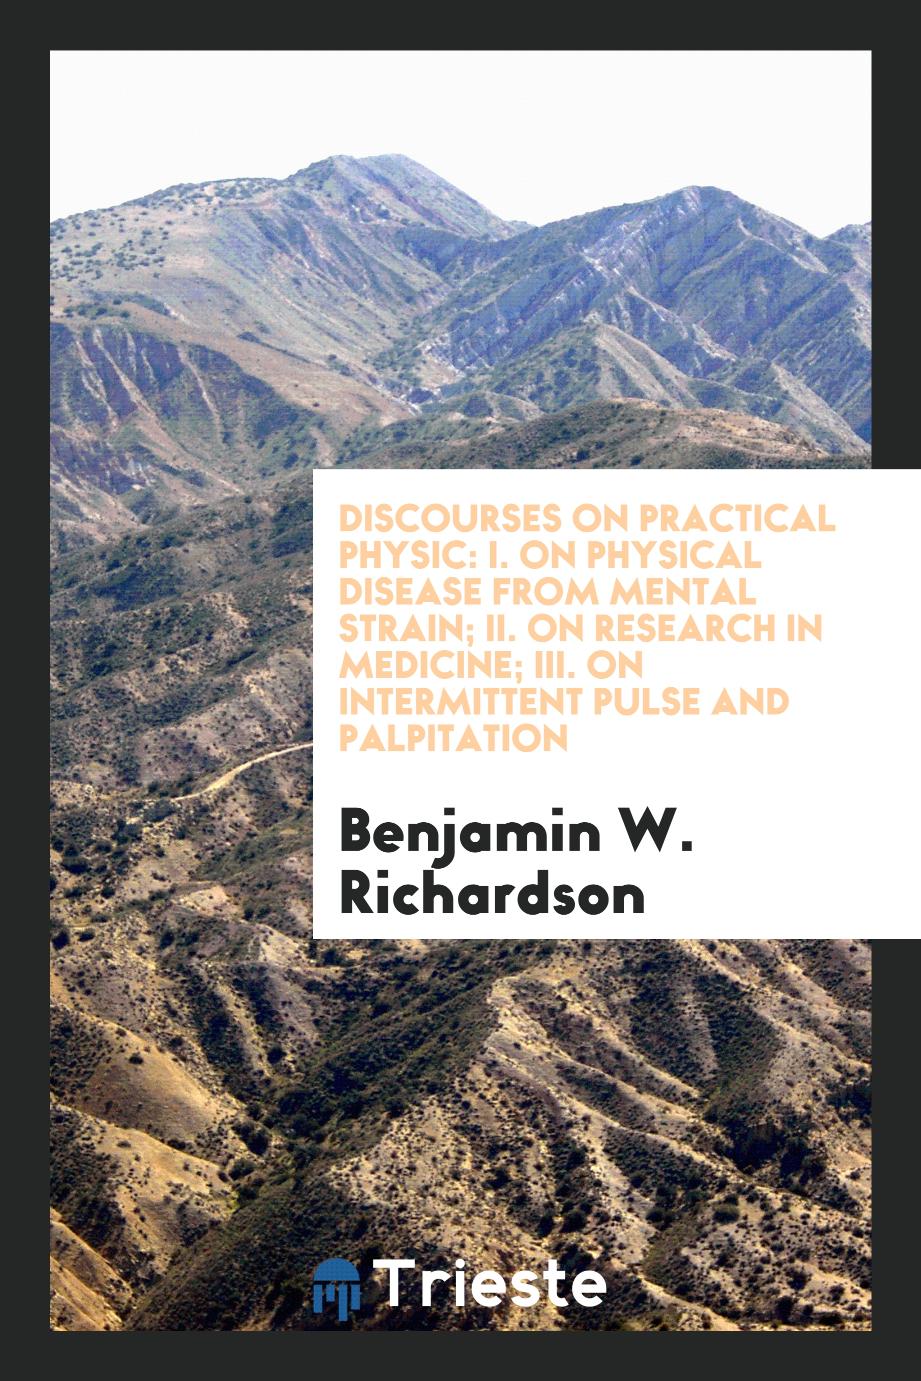 Discourses on Practical Physic: I. On Physical Disease from Mental Strain; II. On Research in Medicine; III. On Intermittent Pulse and Palpitation